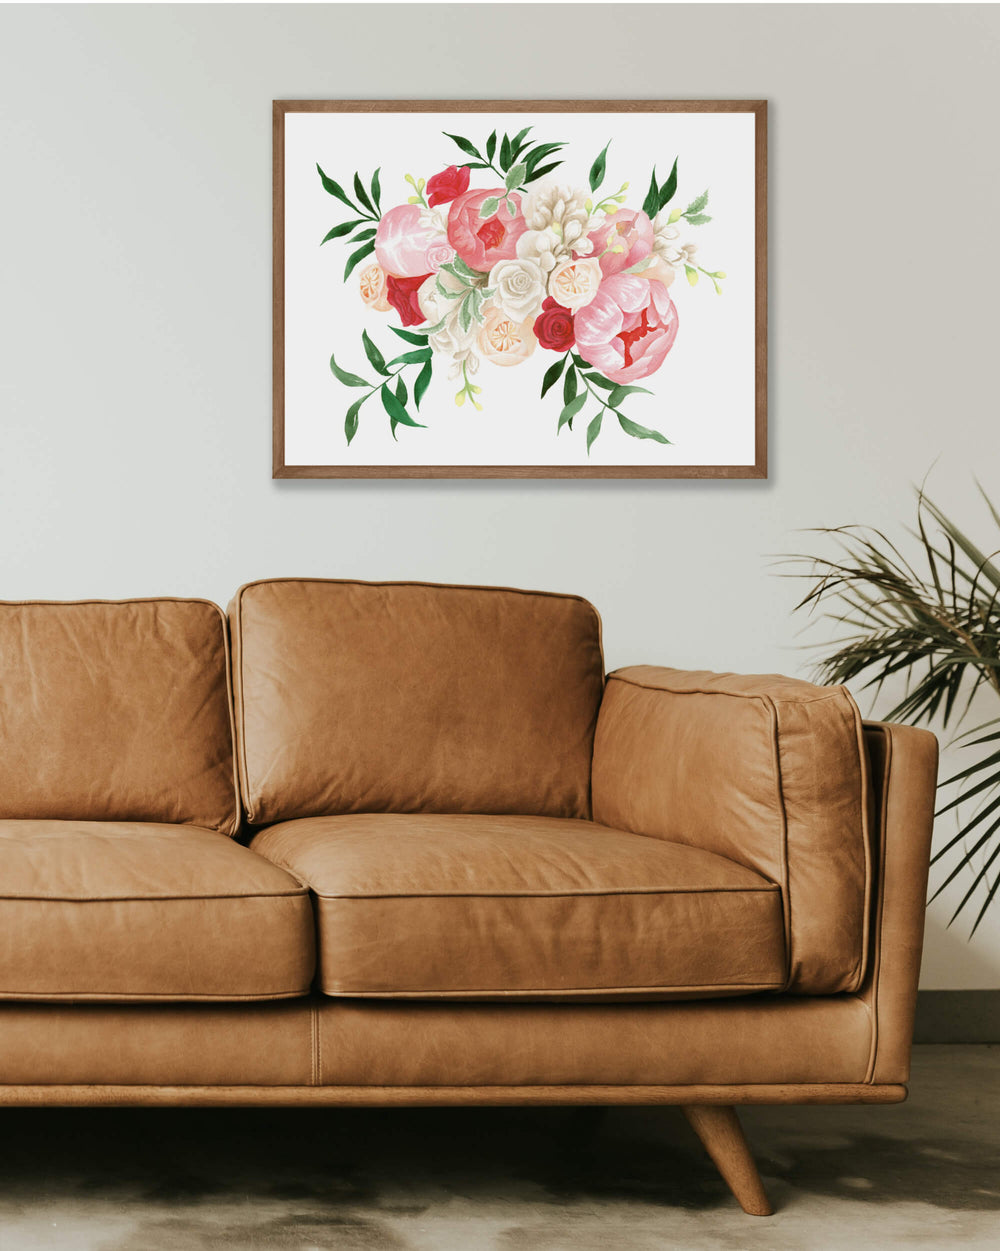 pink wedding bouquet painting on framed on wall above a leather couch and houseplant